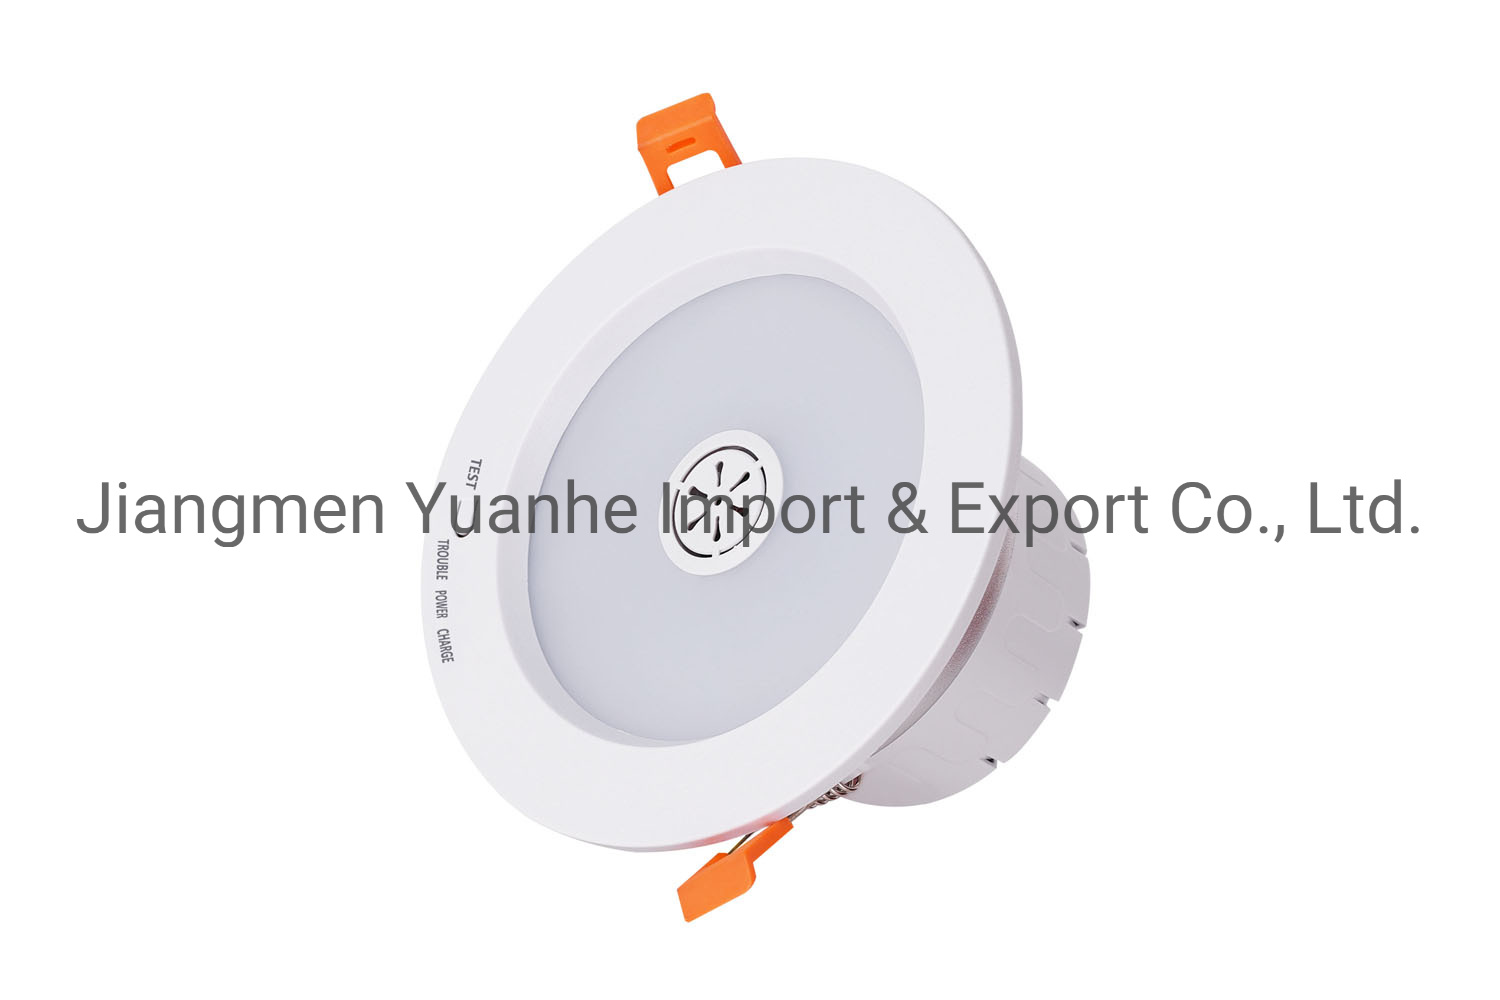 Voice-Activated Emergency LED Downlight